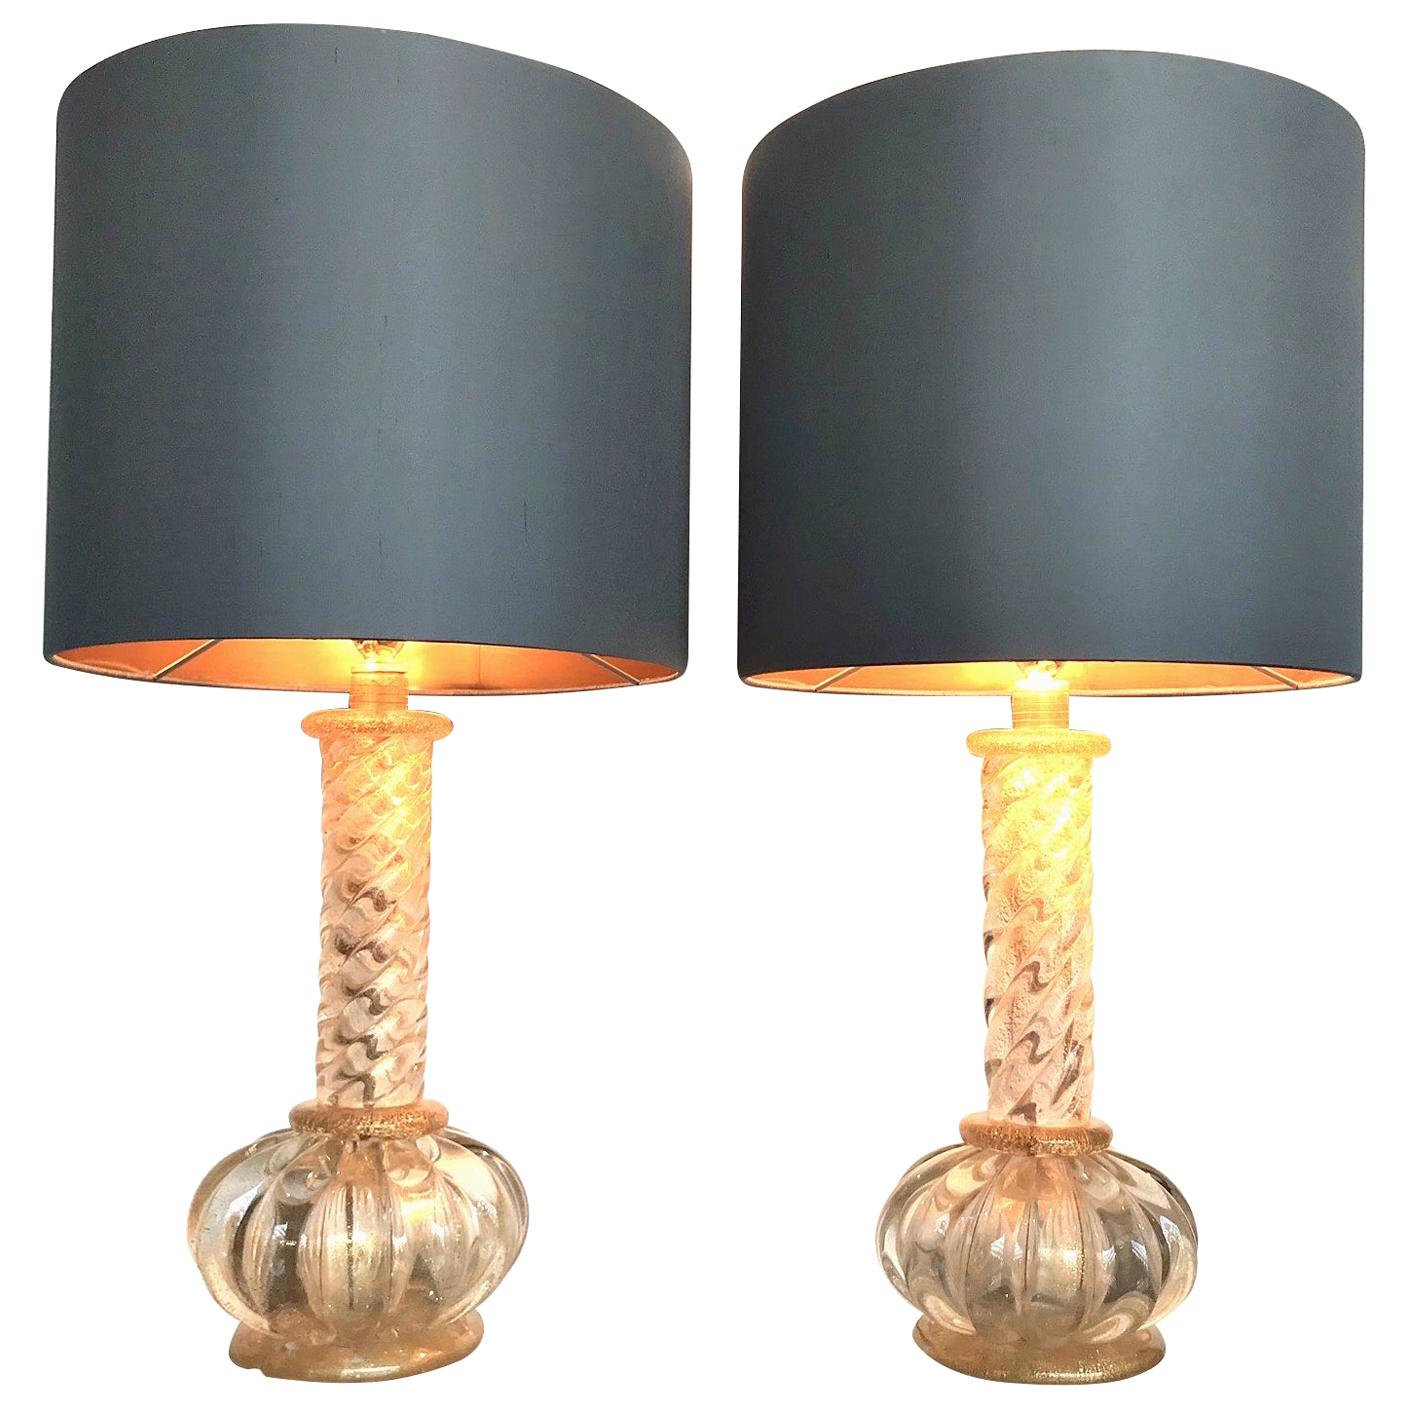 Lovely Pair of Barovier and Toso Gold Leaf Murano Glass Lamps